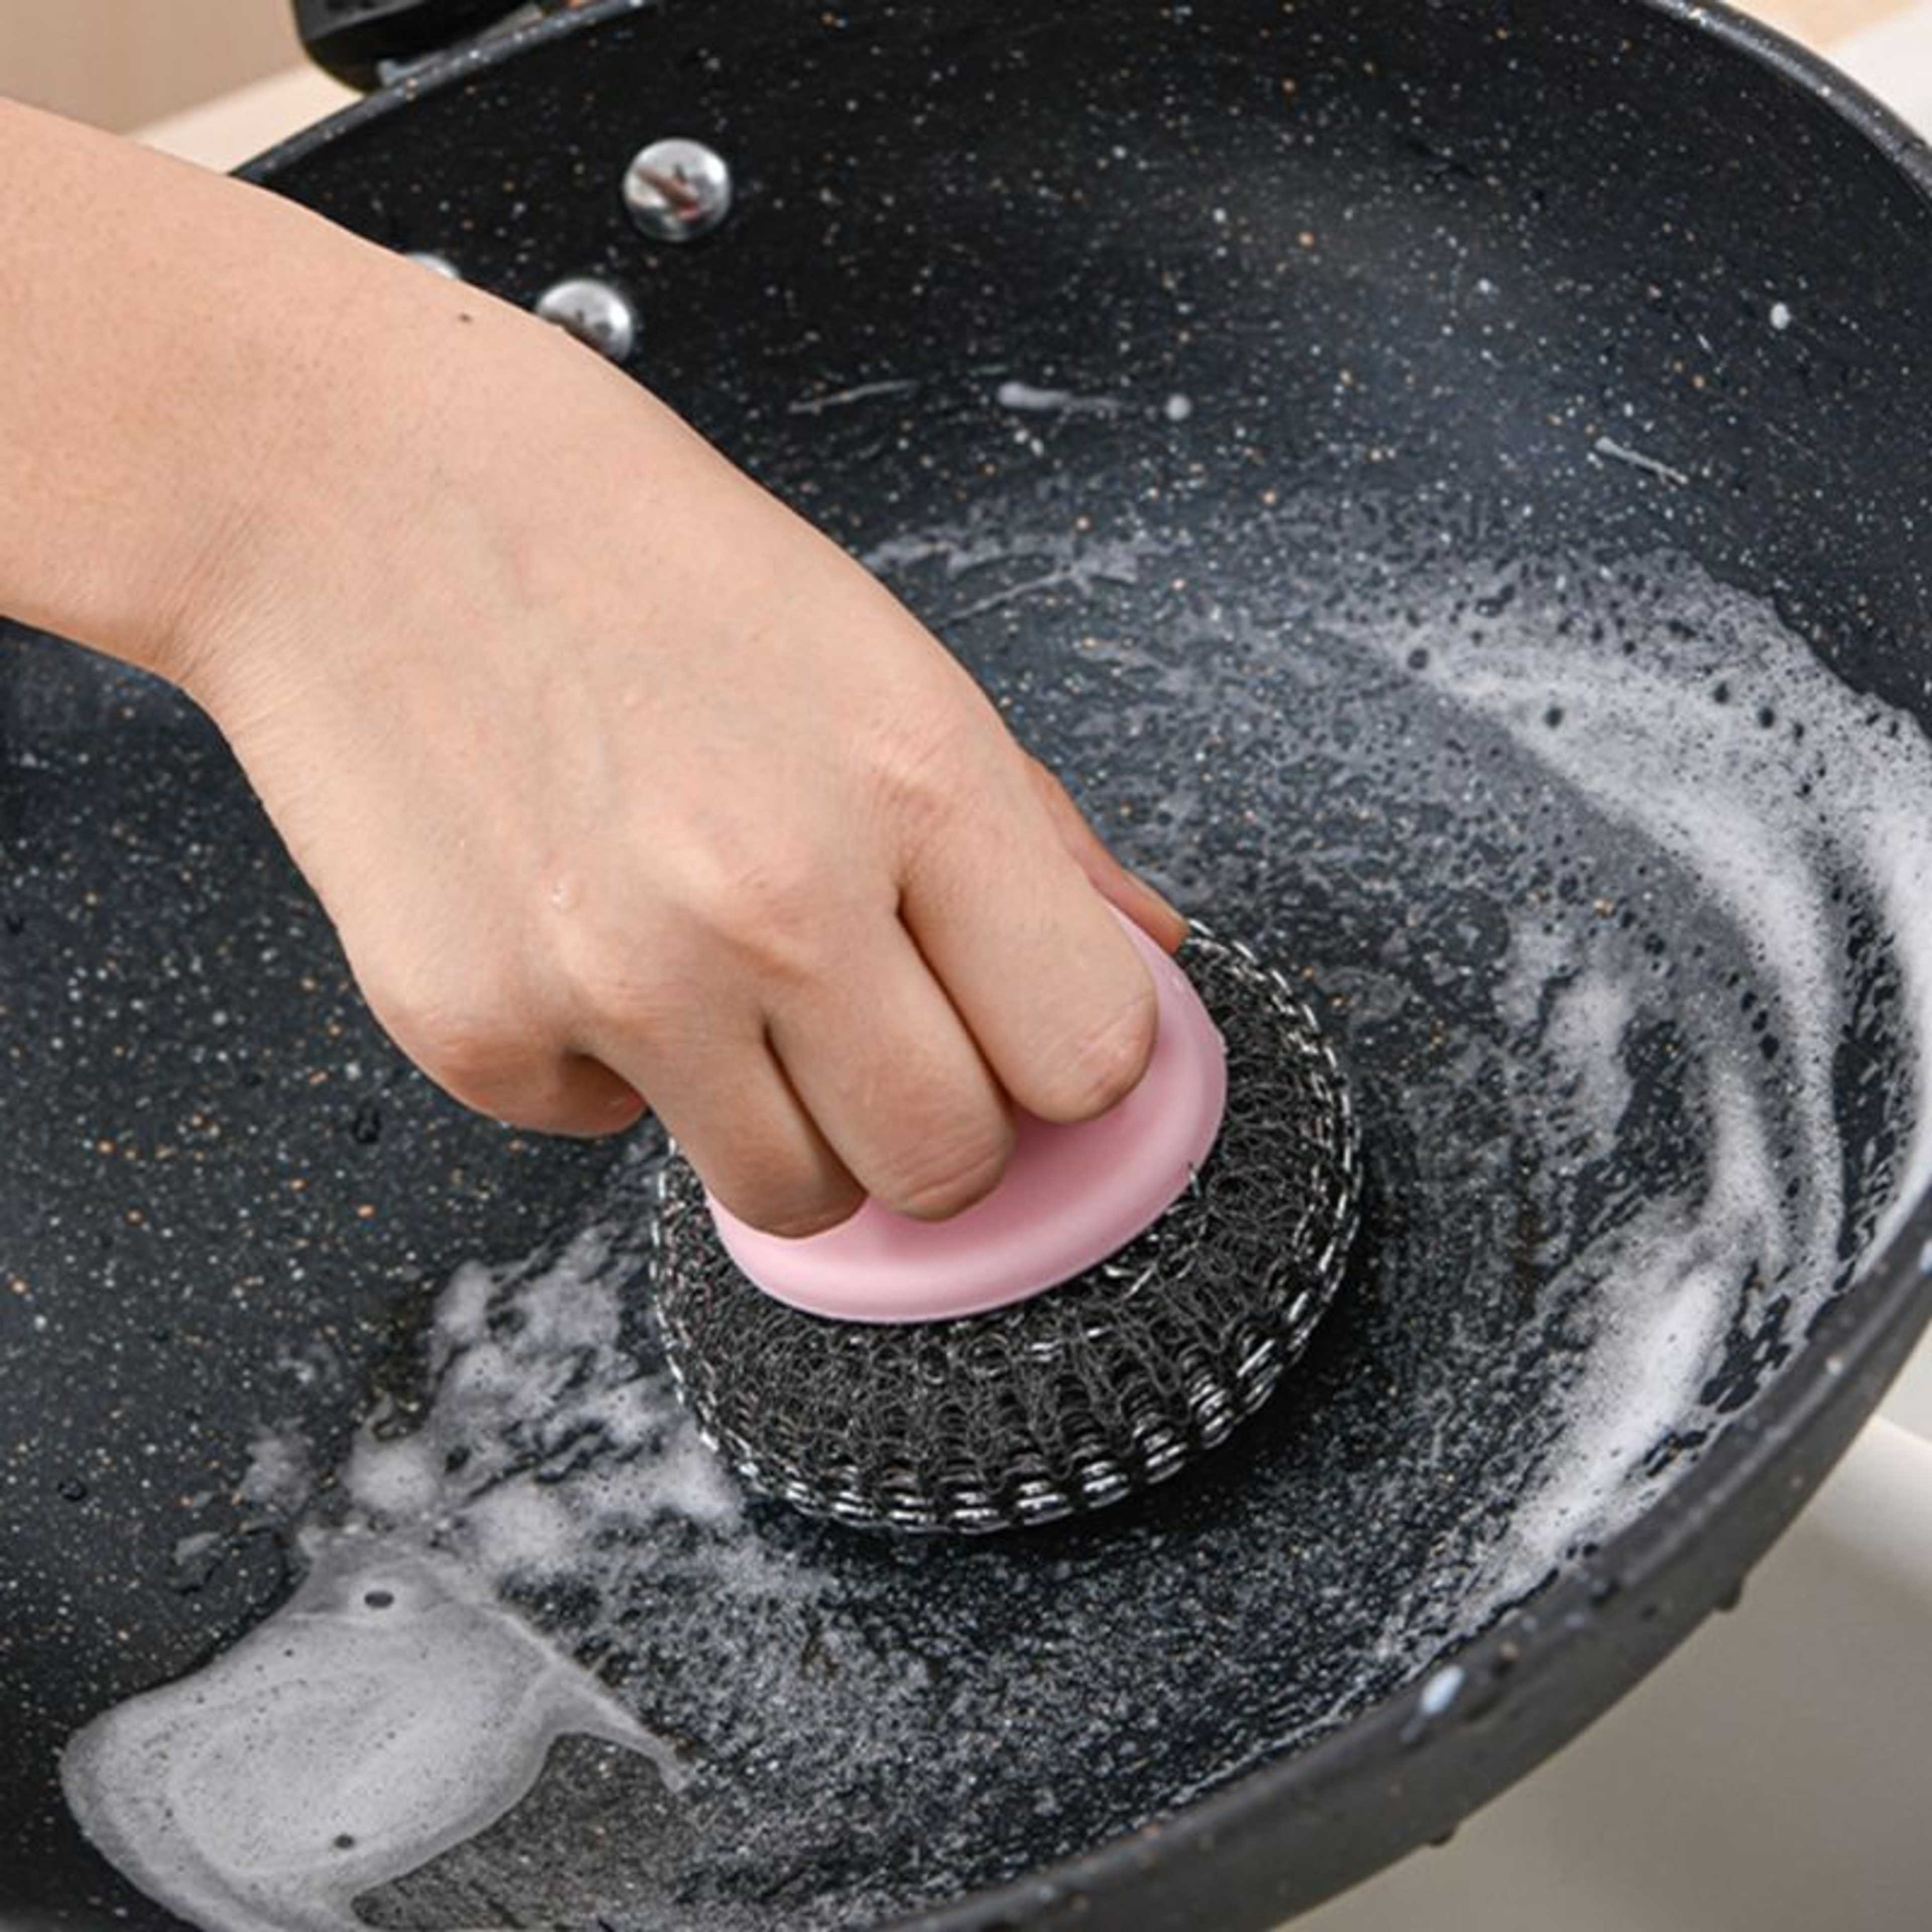 Round Bathing & Pot Cleaning Scrubber